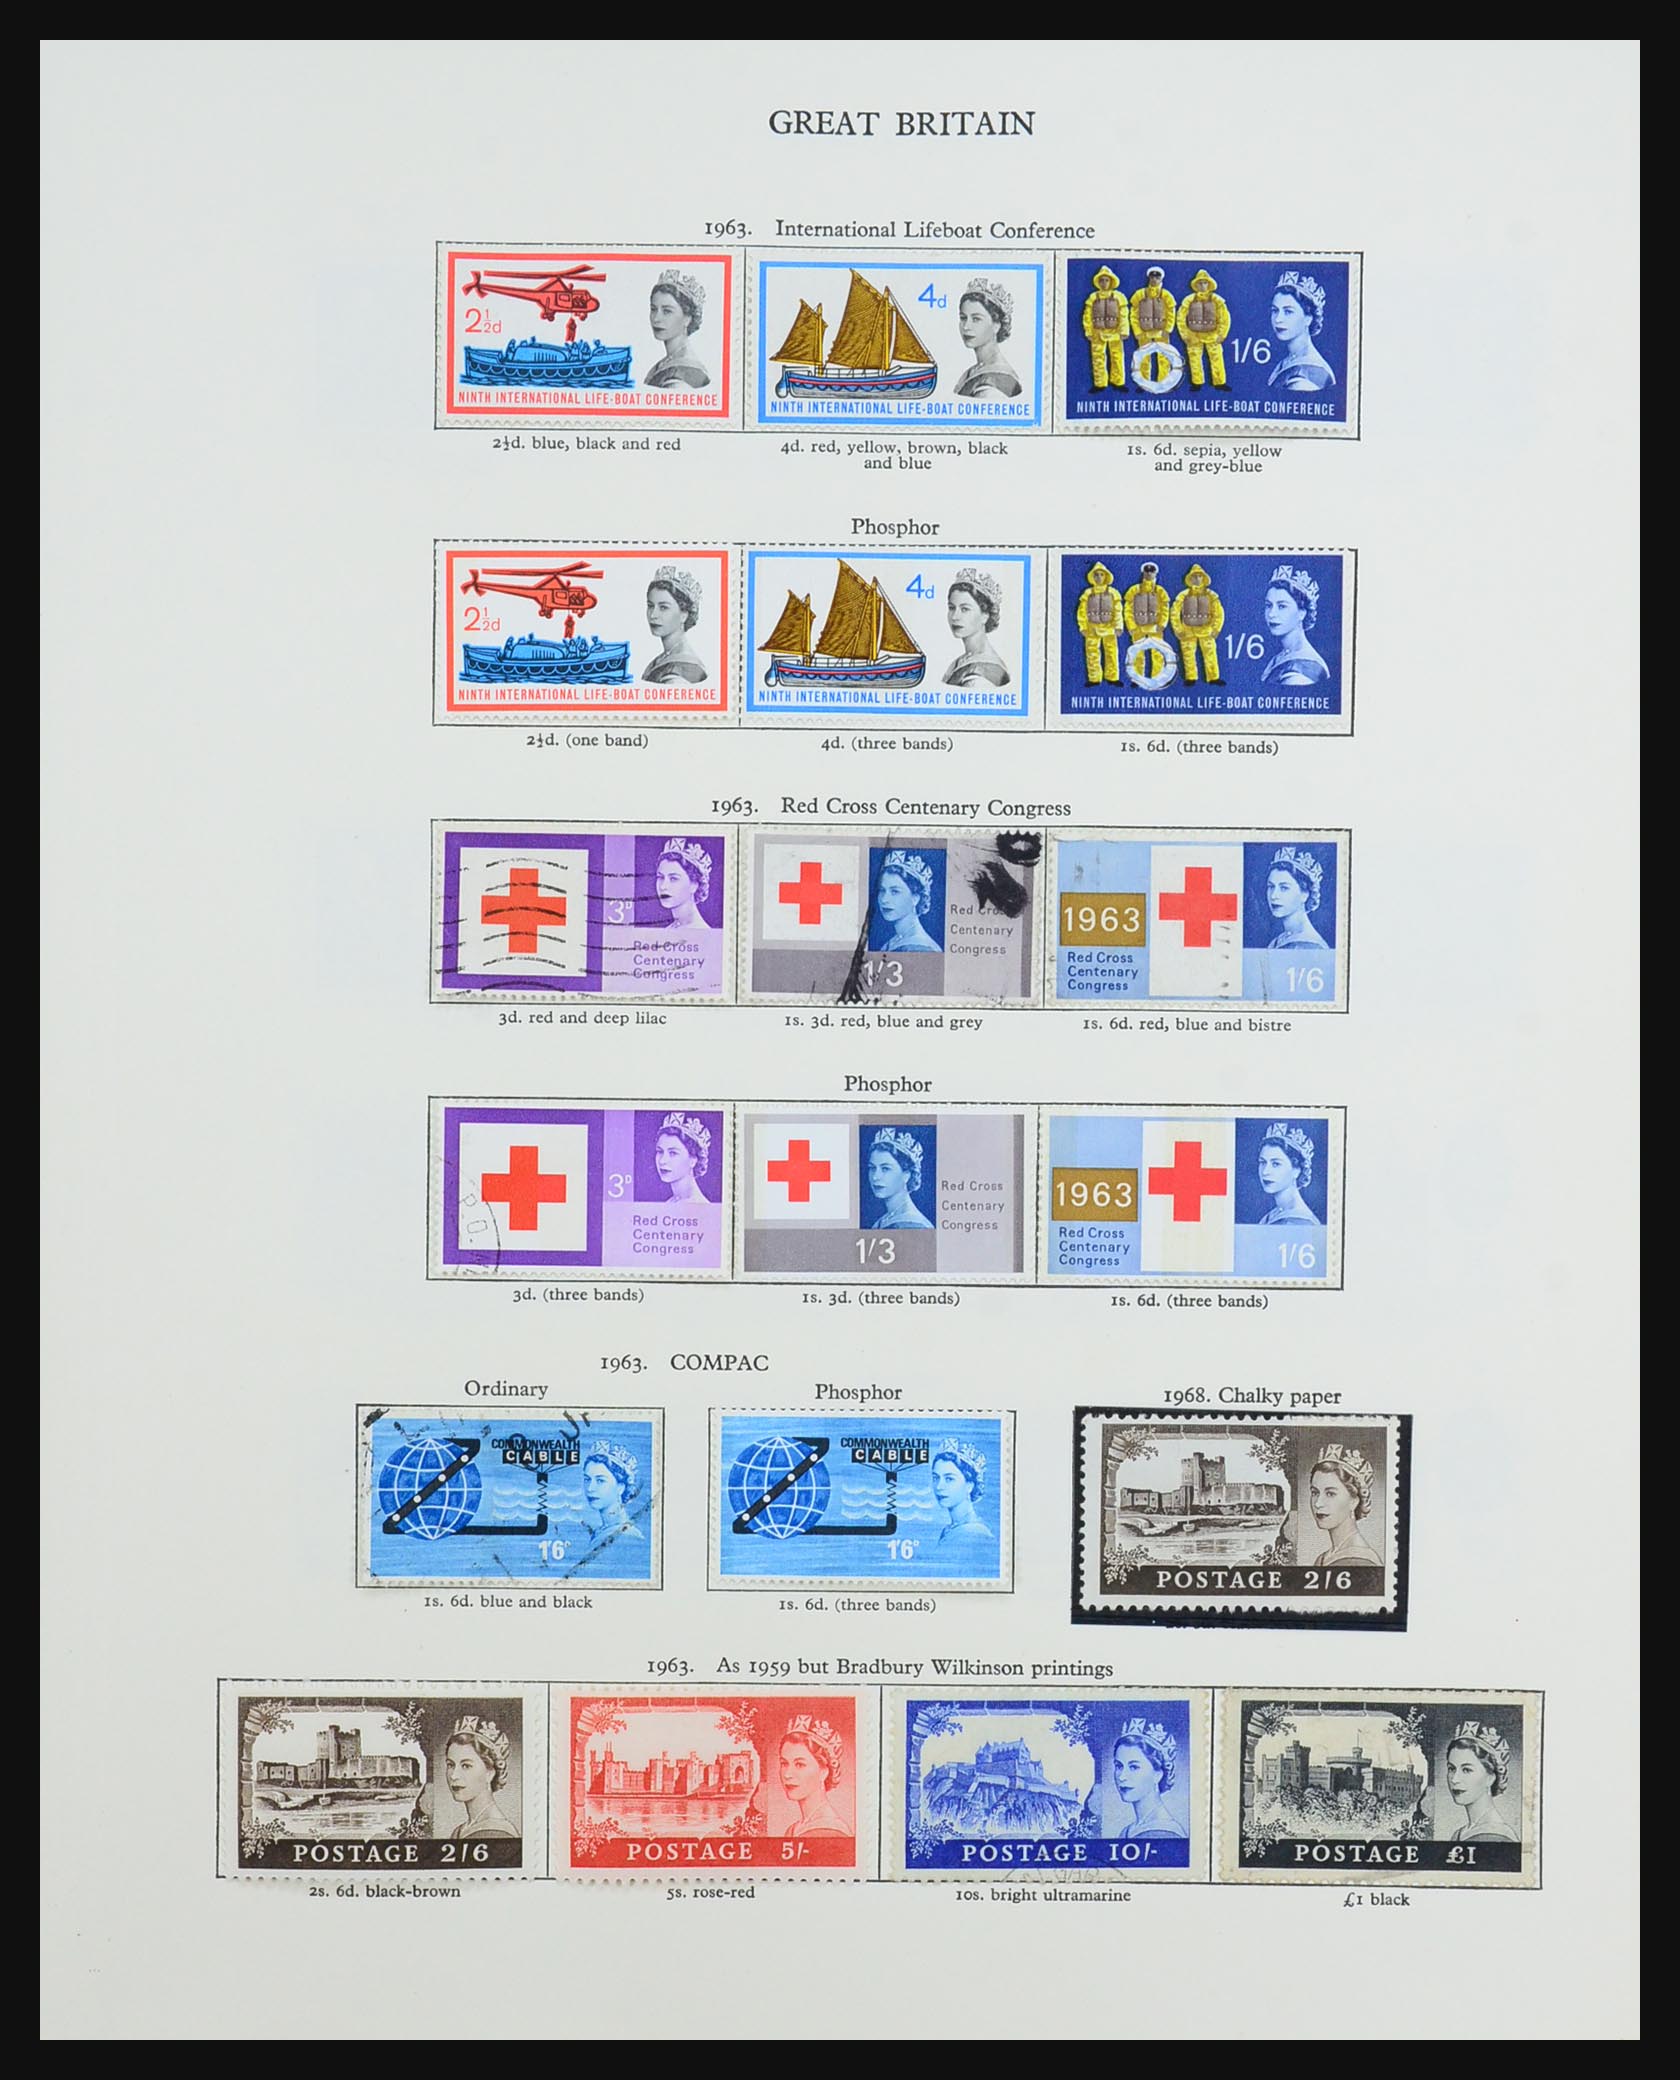 31503 007 - 31503 Great Britain and Commonwealth 1953-1971.